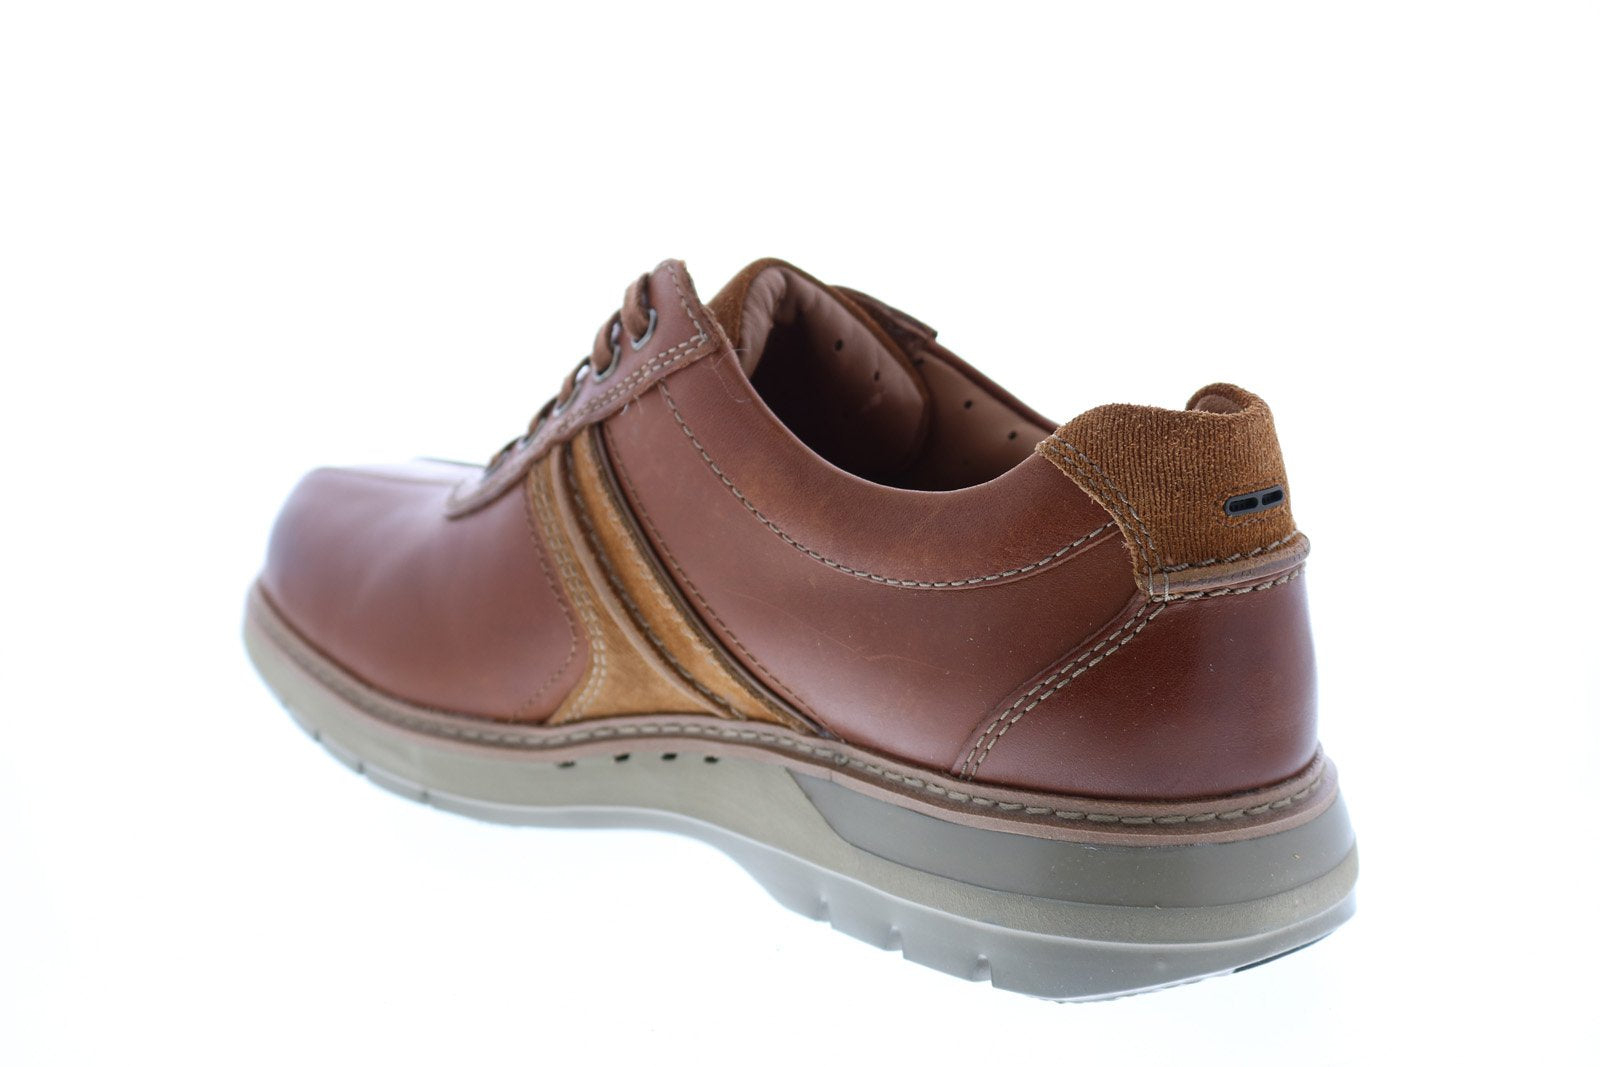 85 Casual Clarks unbend lace brown shoes for Women